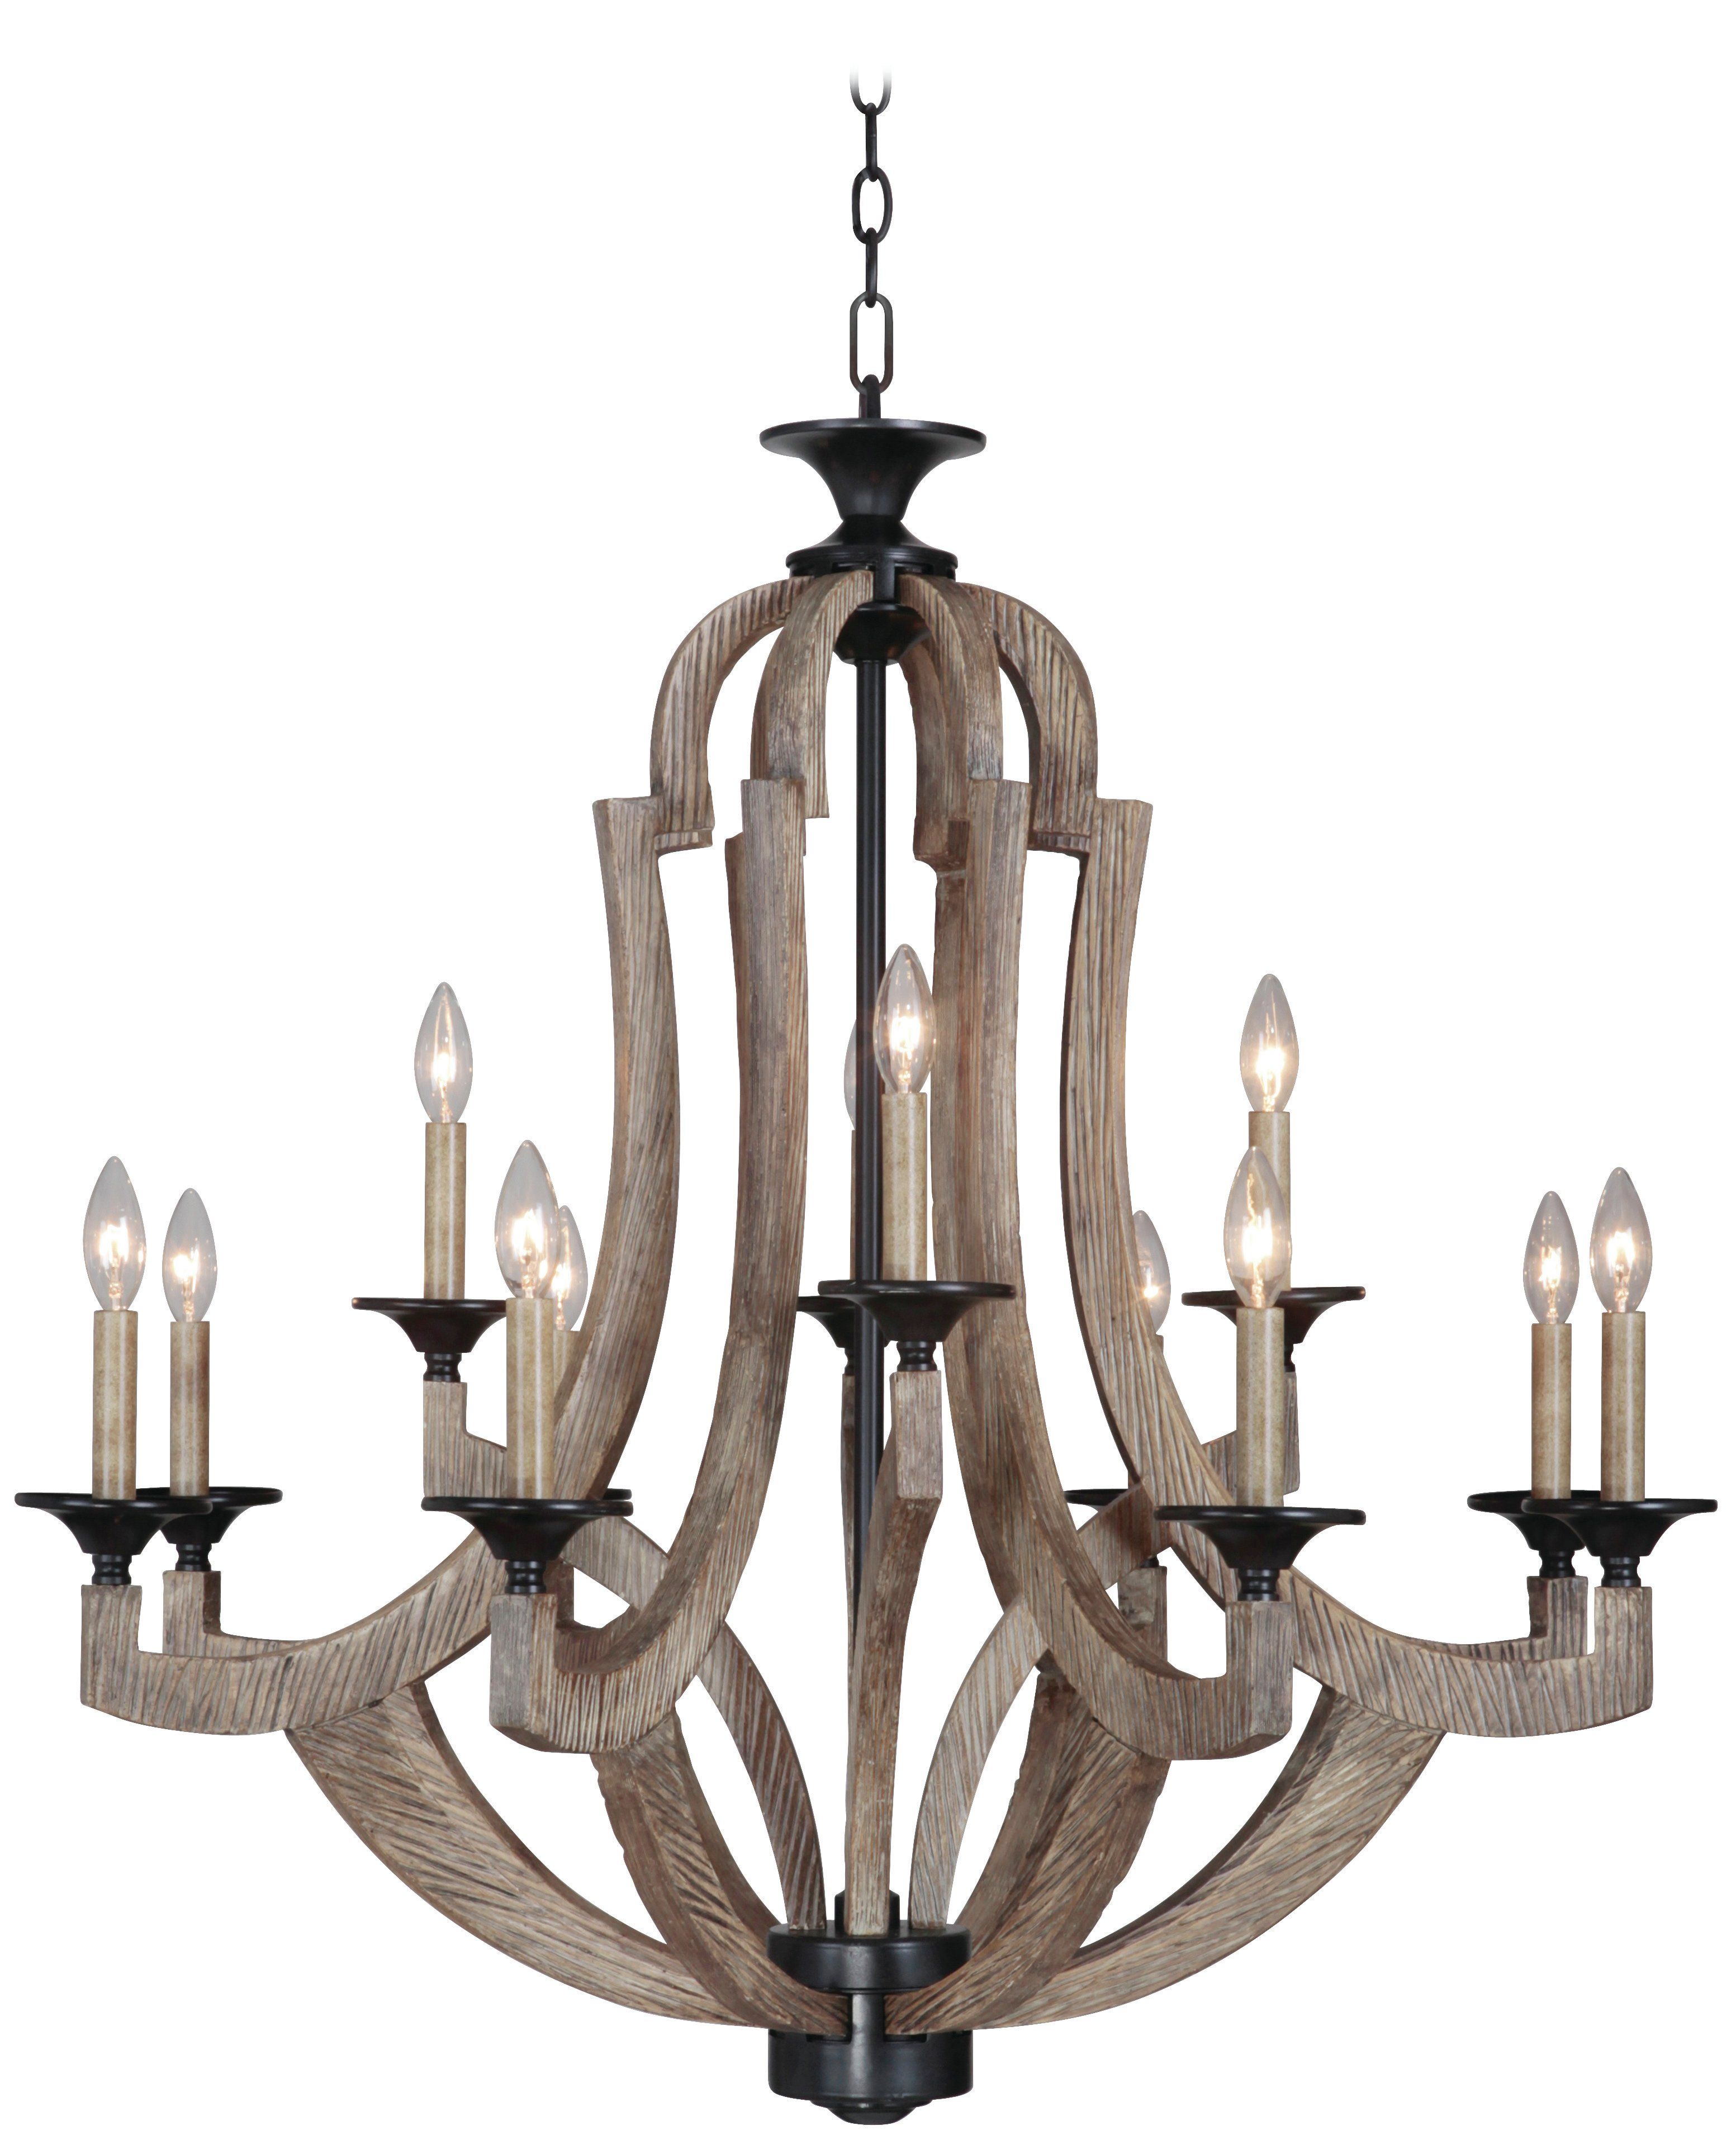 Farmhouse & Rustic 2 Tier Chandeliers | Birch Lane With Regard To Kenedy 9 Light Candle Style Chandeliers (View 14 of 30)